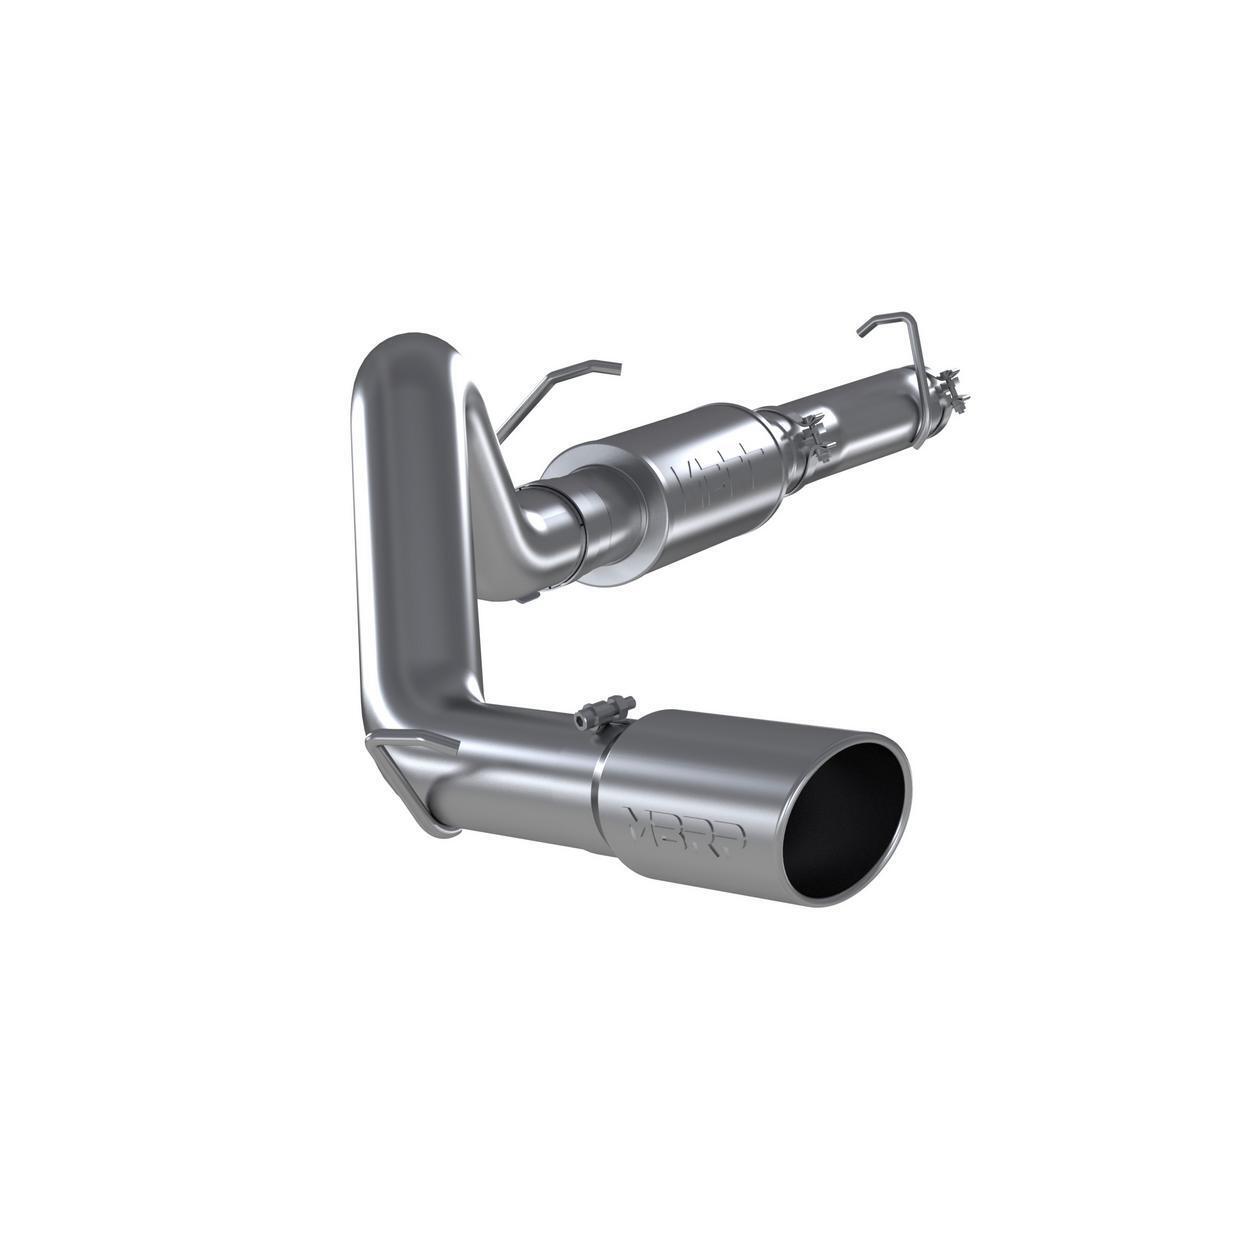 MBRP S6285AL-AC Exhaust System Kit Fits 2004-2005 Ford E-350 Club Wagon